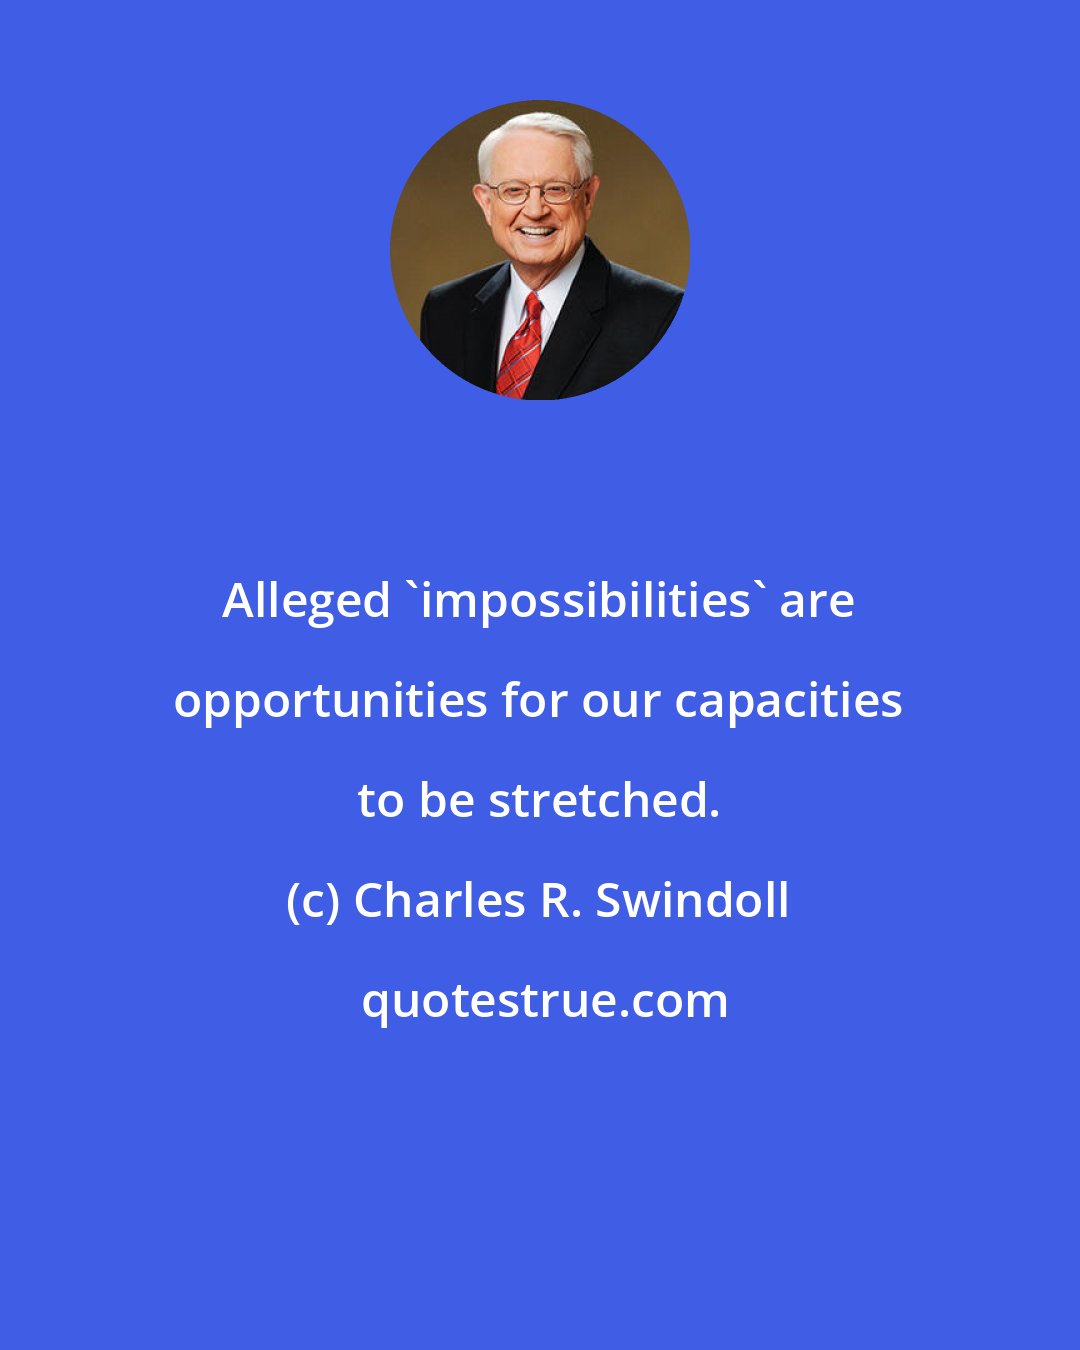 Charles R. Swindoll: Alleged 'impossibilities' are opportunities for our capacities to be stretched.